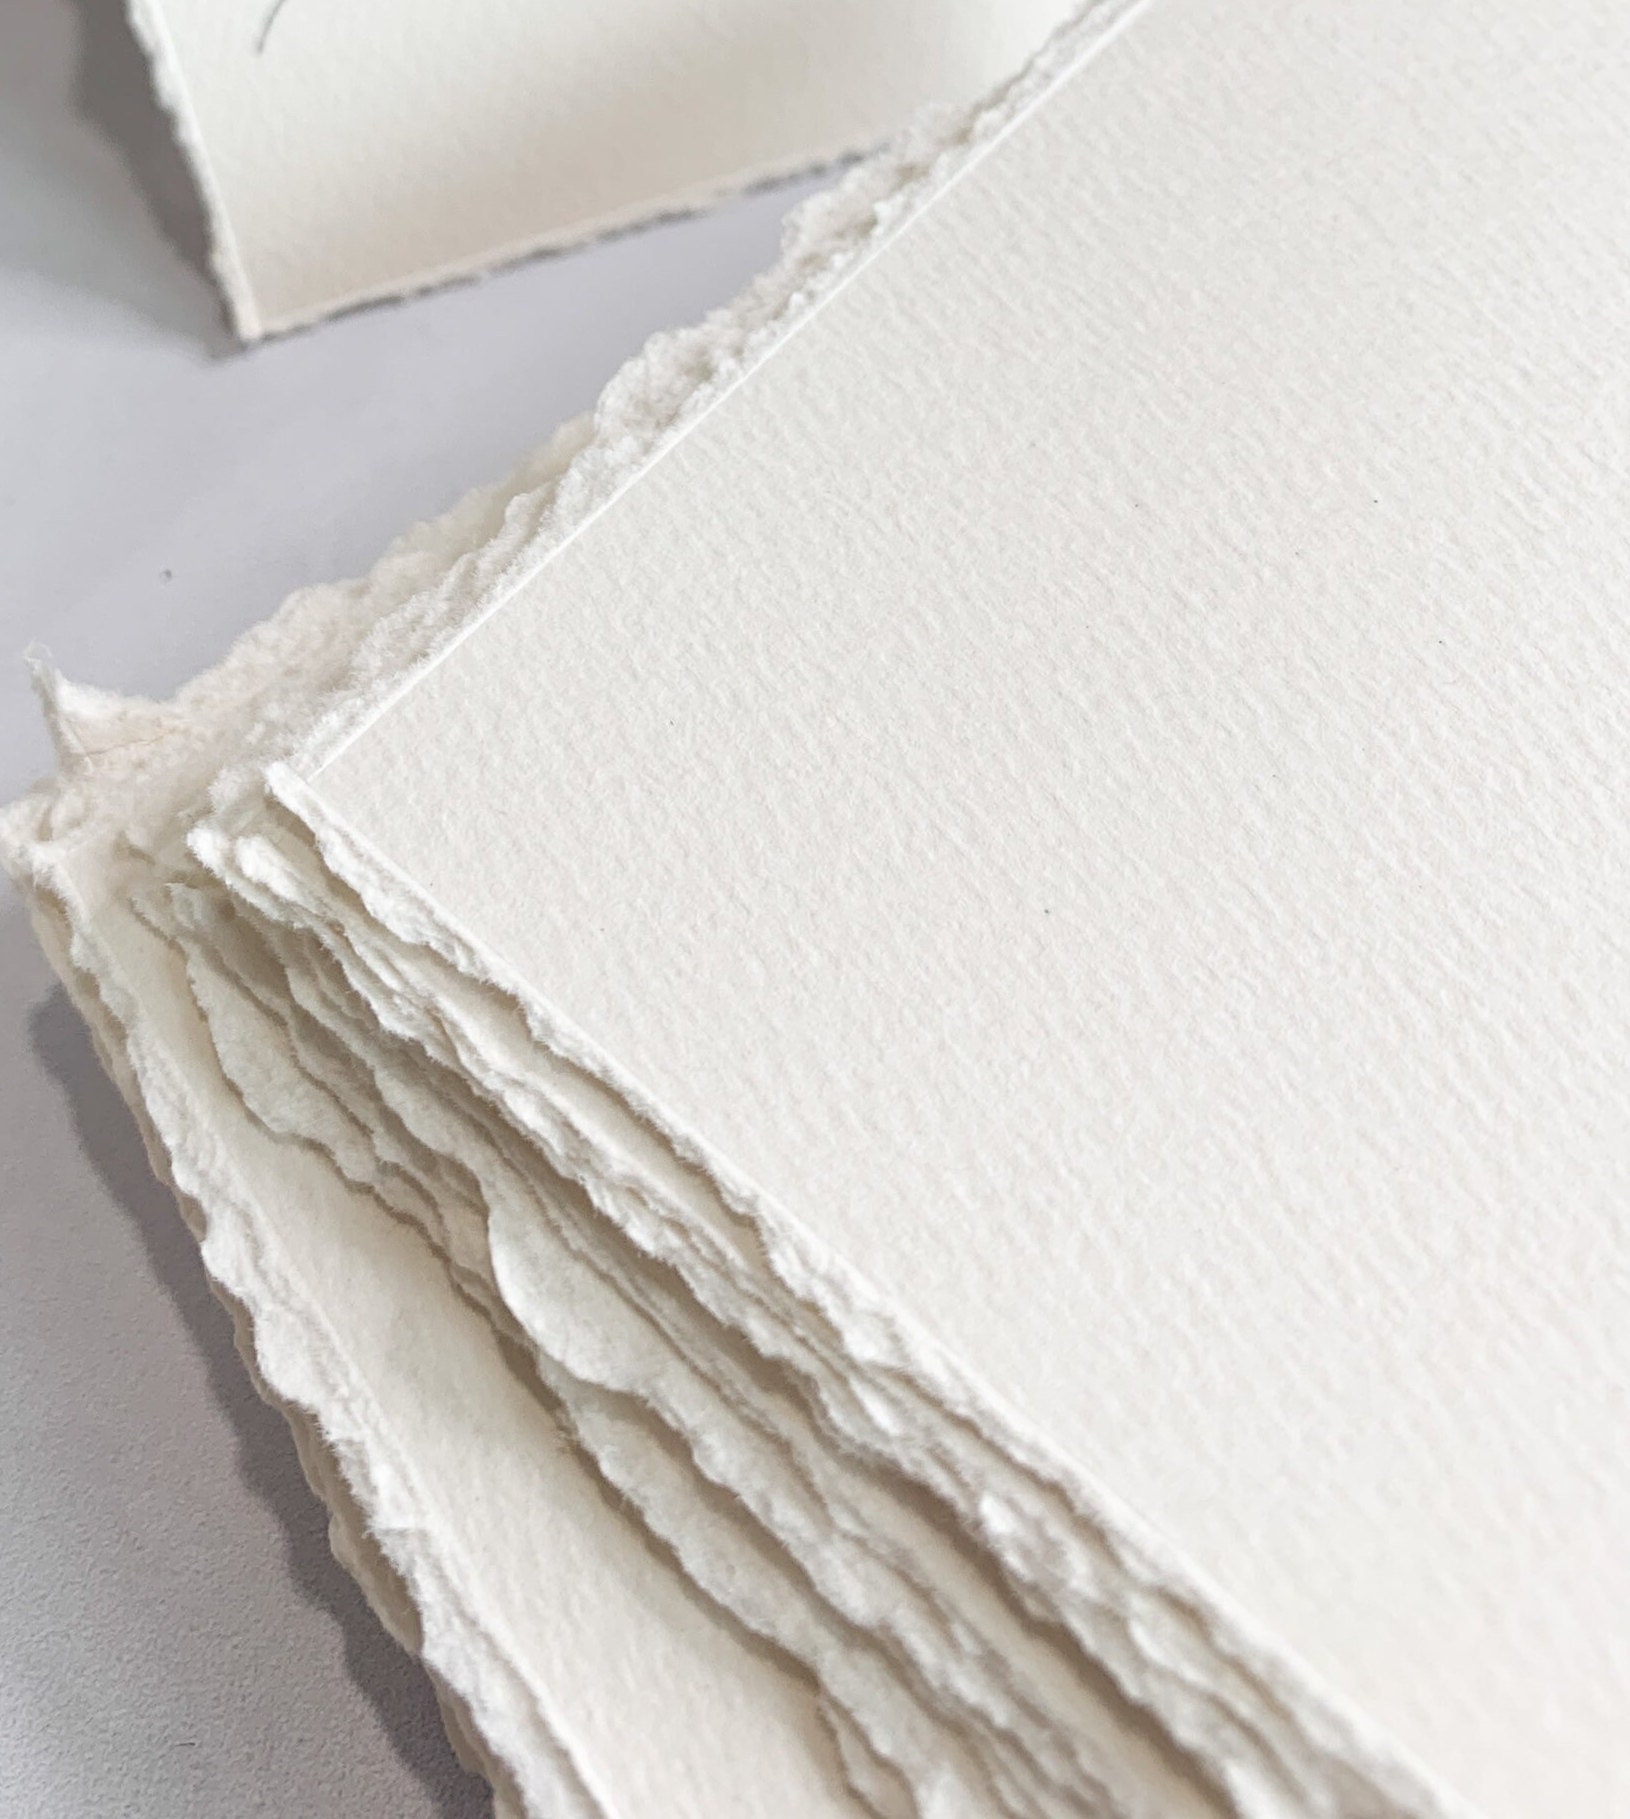  Thick Handmade A6 Size Watercolor Paper with Deckle Edge - 4x6  - 300GSM - Premium White Cold Press Textured Mixed Media Paper Made with  Recycled Cotton - 25 Loose Leaf Sheets 